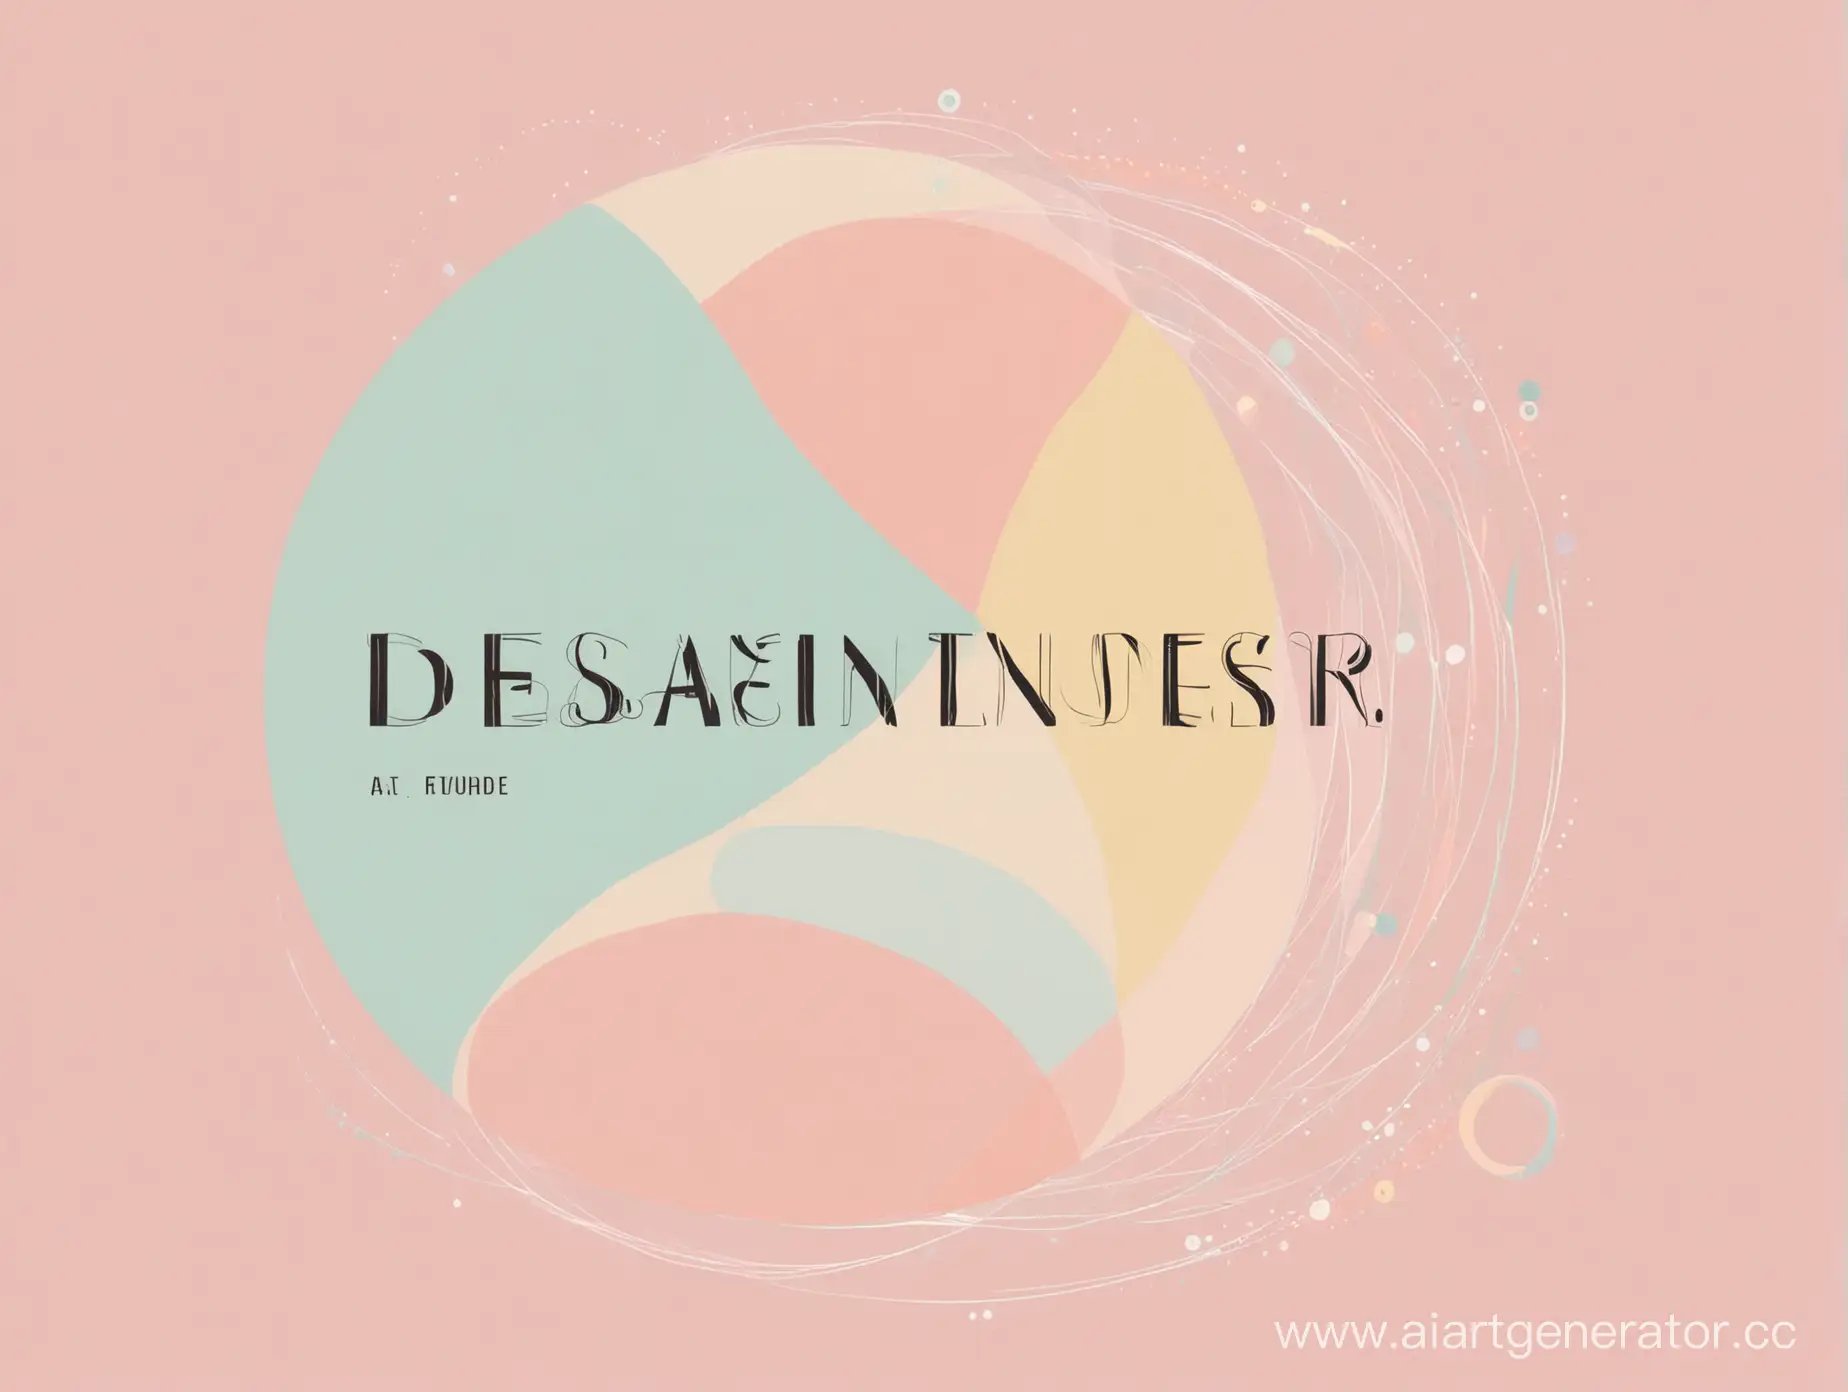 Designer-Magazine-Cover-with-Pastel-Abstract-Patterns-and-Modern-Text